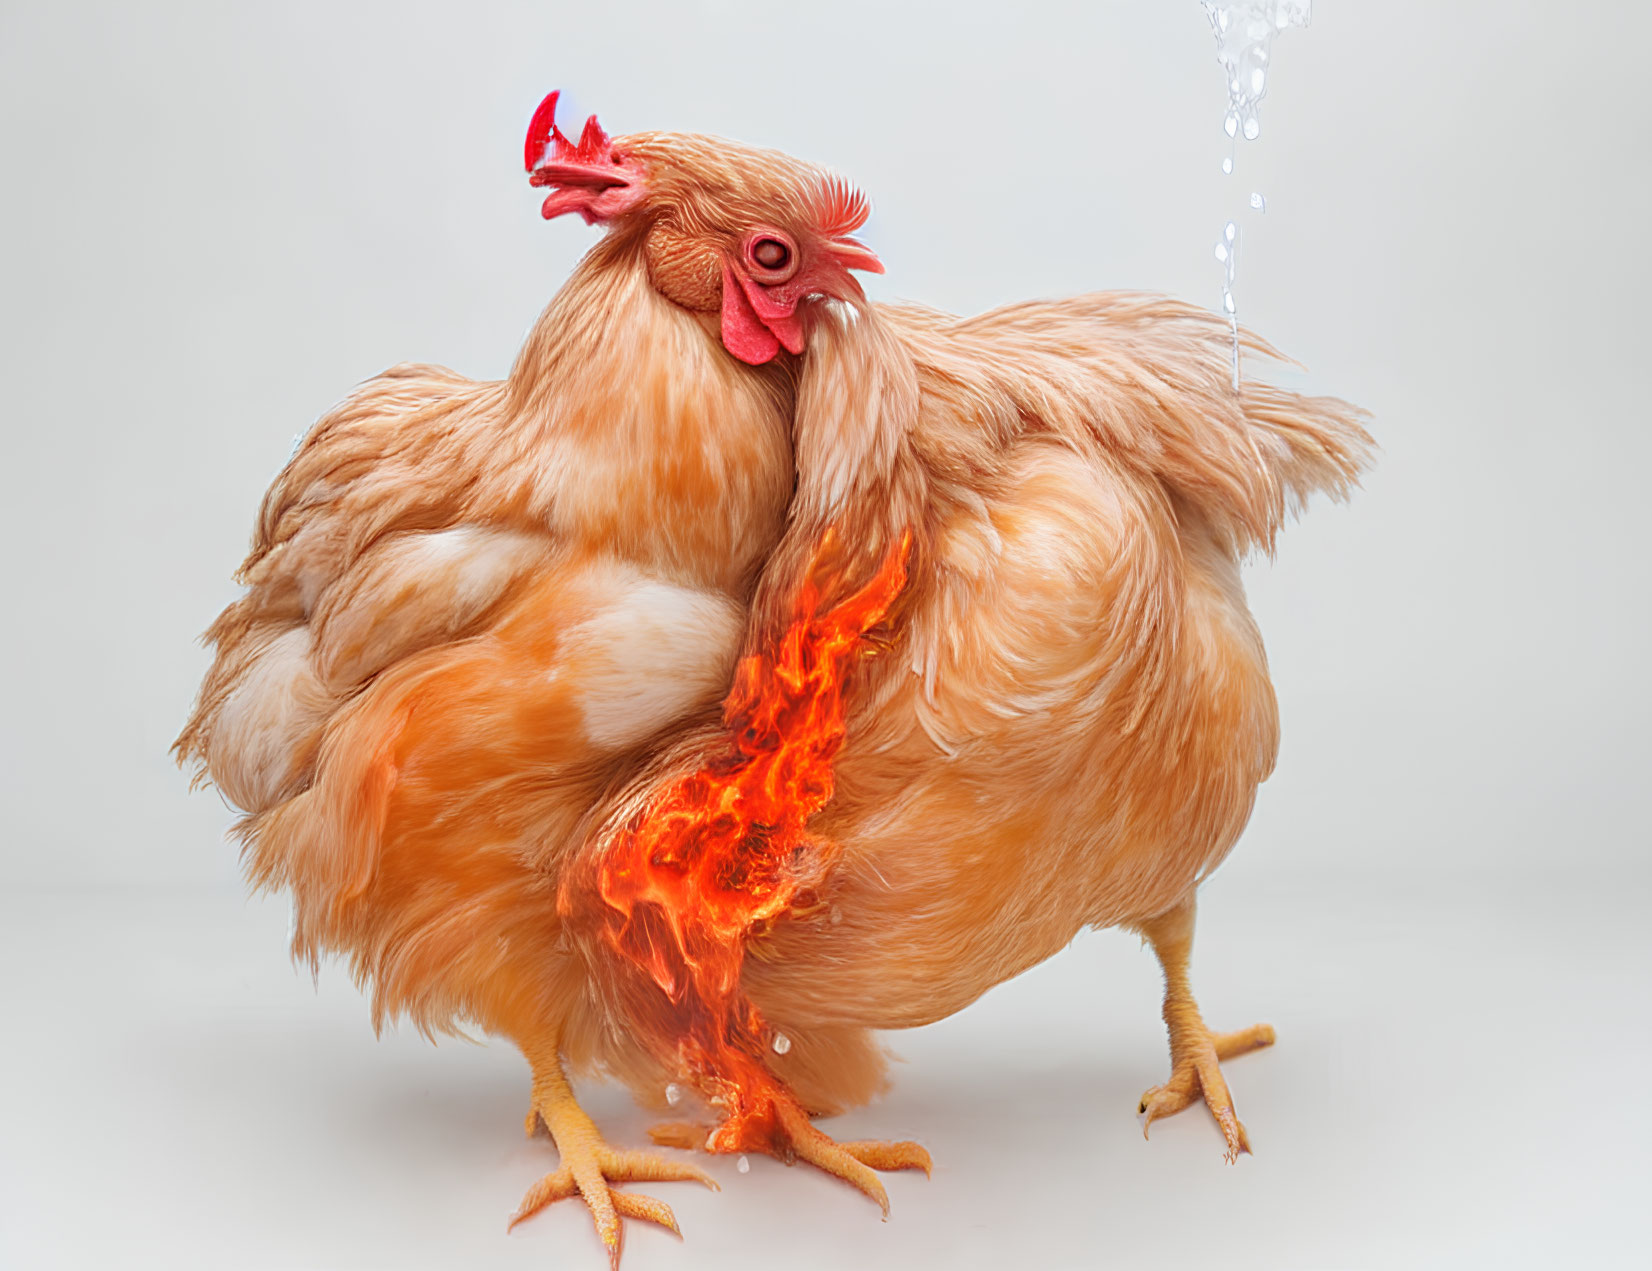 Orange-Feathered Chicken with Fire and Water Elements